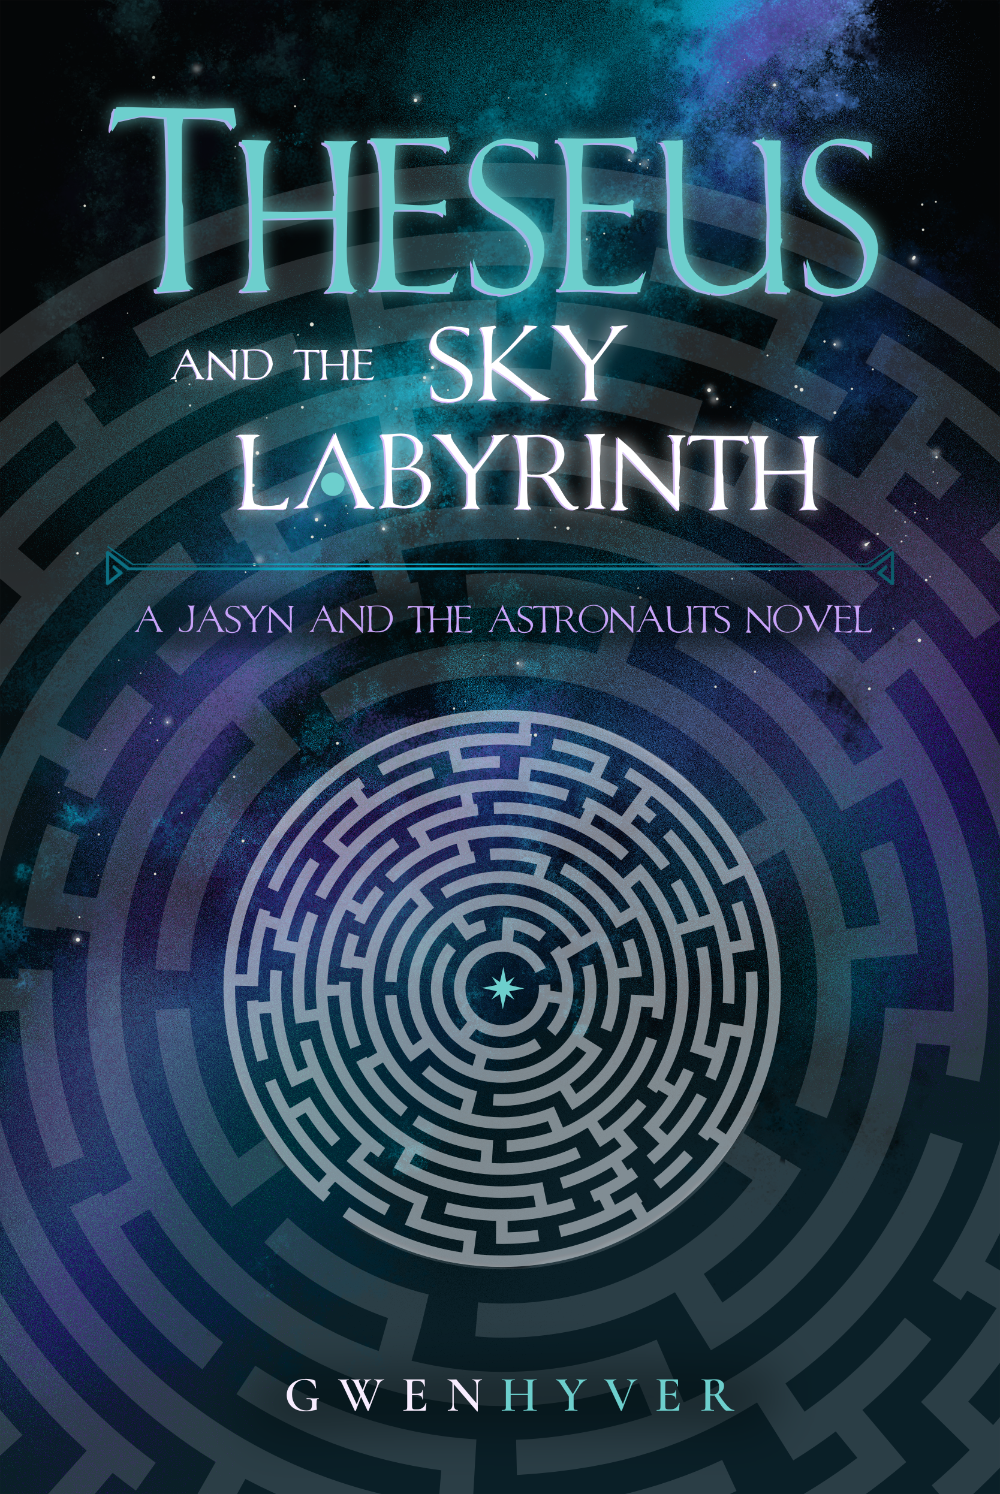 Theseus and the Sky Labyrinth